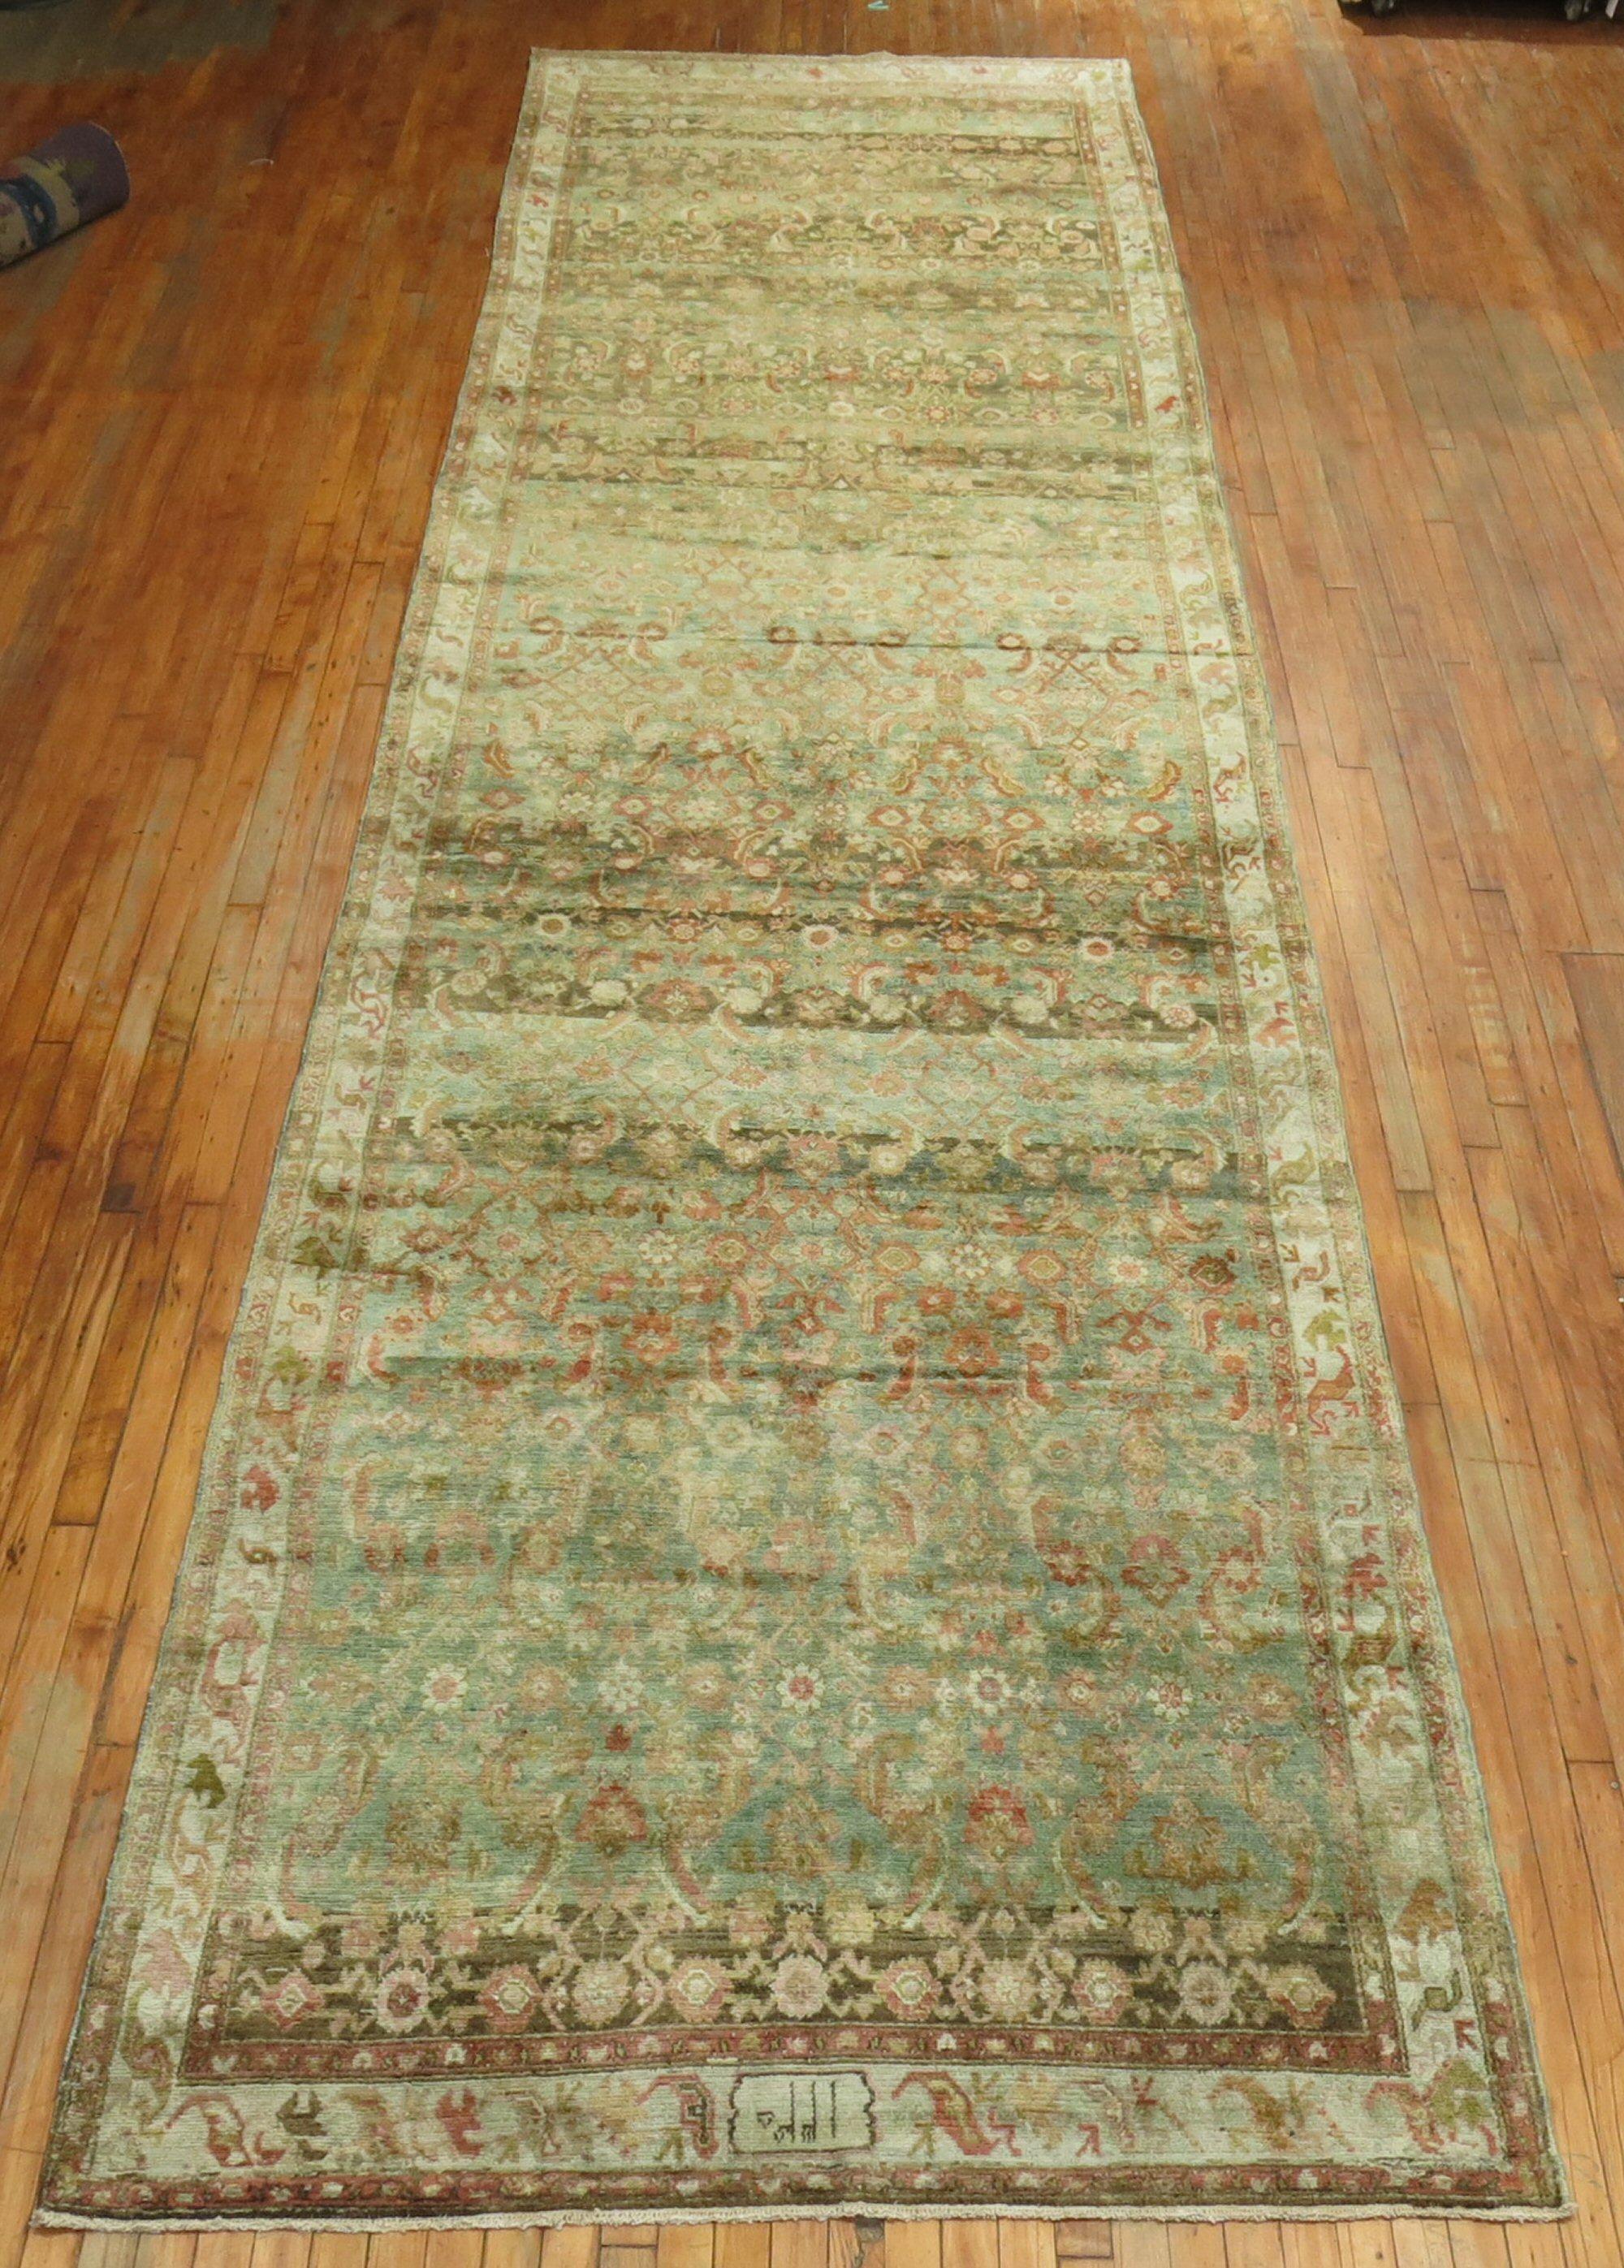 Stunning Persian Malayer rug from the early 20th century with a green field color, accents in terracotta, pink and brown.
Don't recall ever seeing size on a runner from this village before.

Measures: 5'2